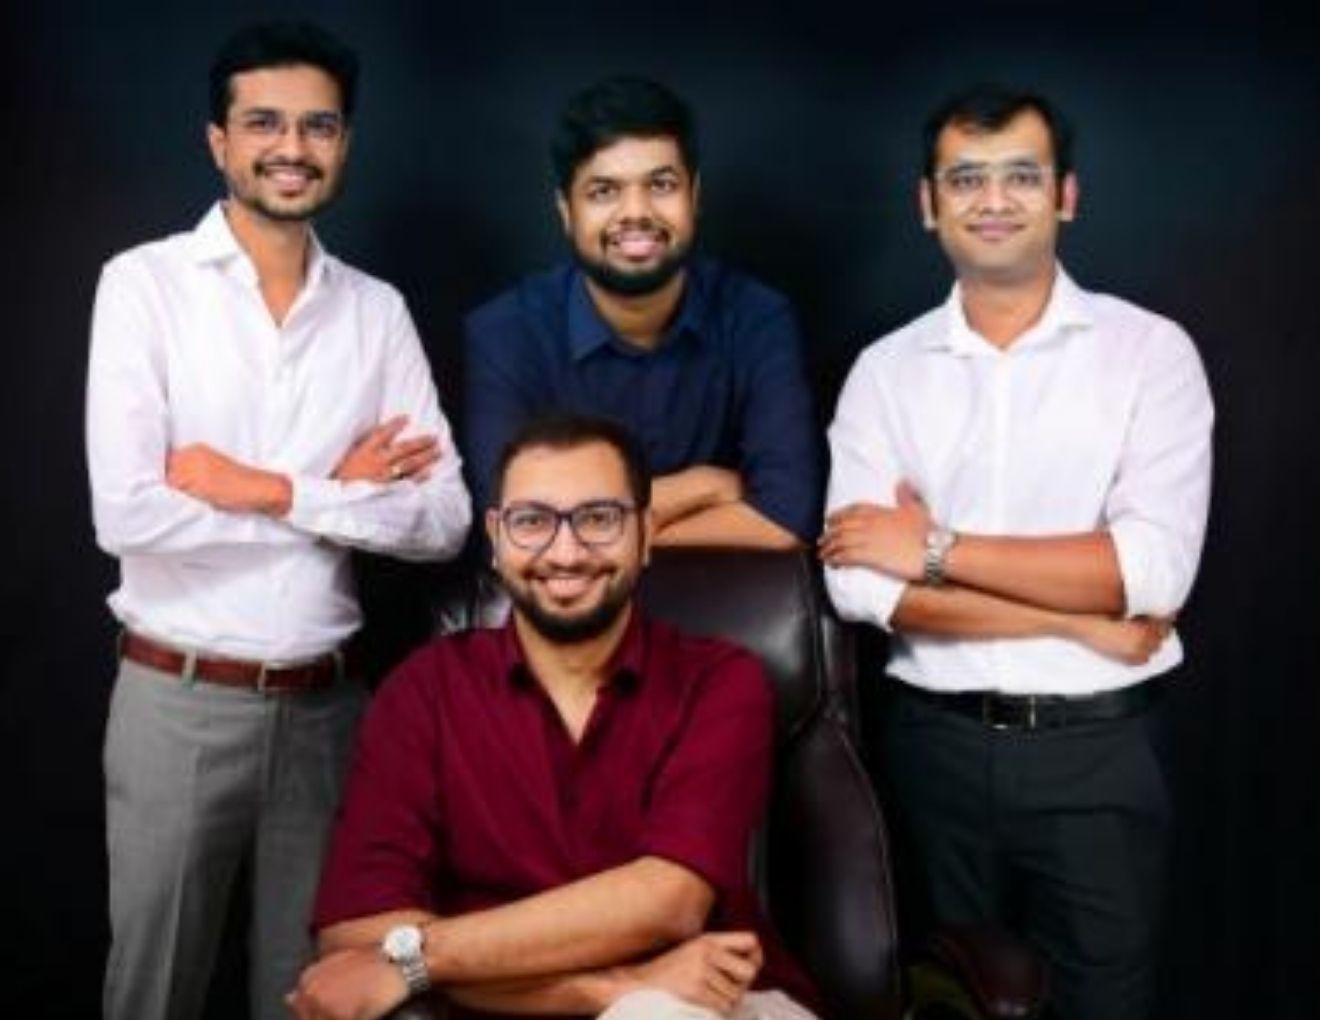 Teachmint Looks To Tap Online Tutoring Demand With Seed Funding From Lightspeed, Others